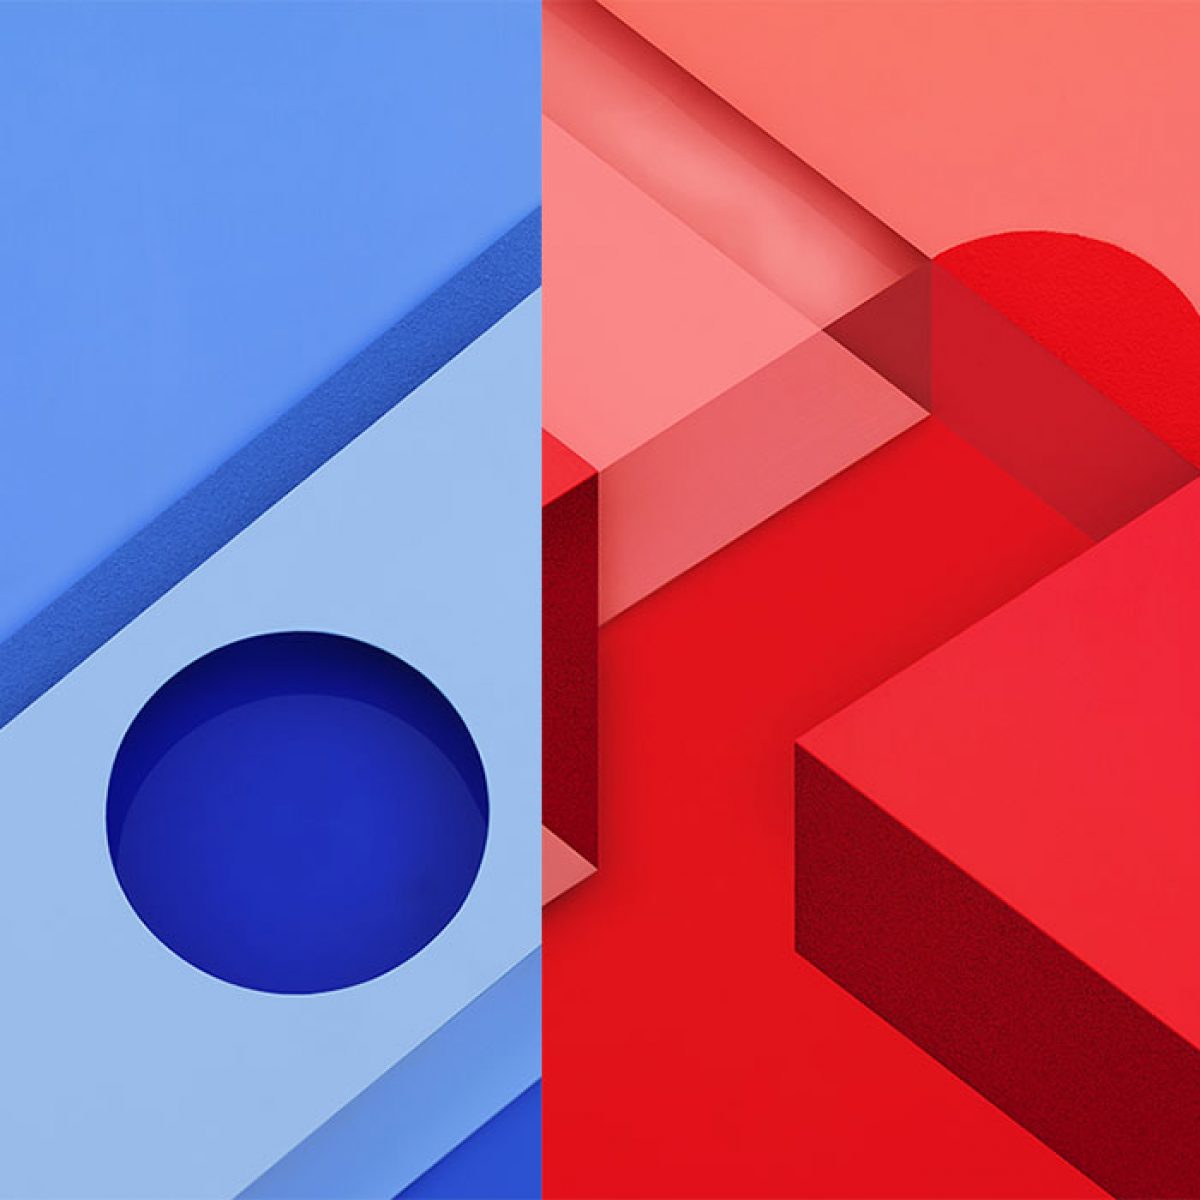 Google Shares Two Exclusive Material Design Wallpapers You Haven't Seen Before, Download Them Here